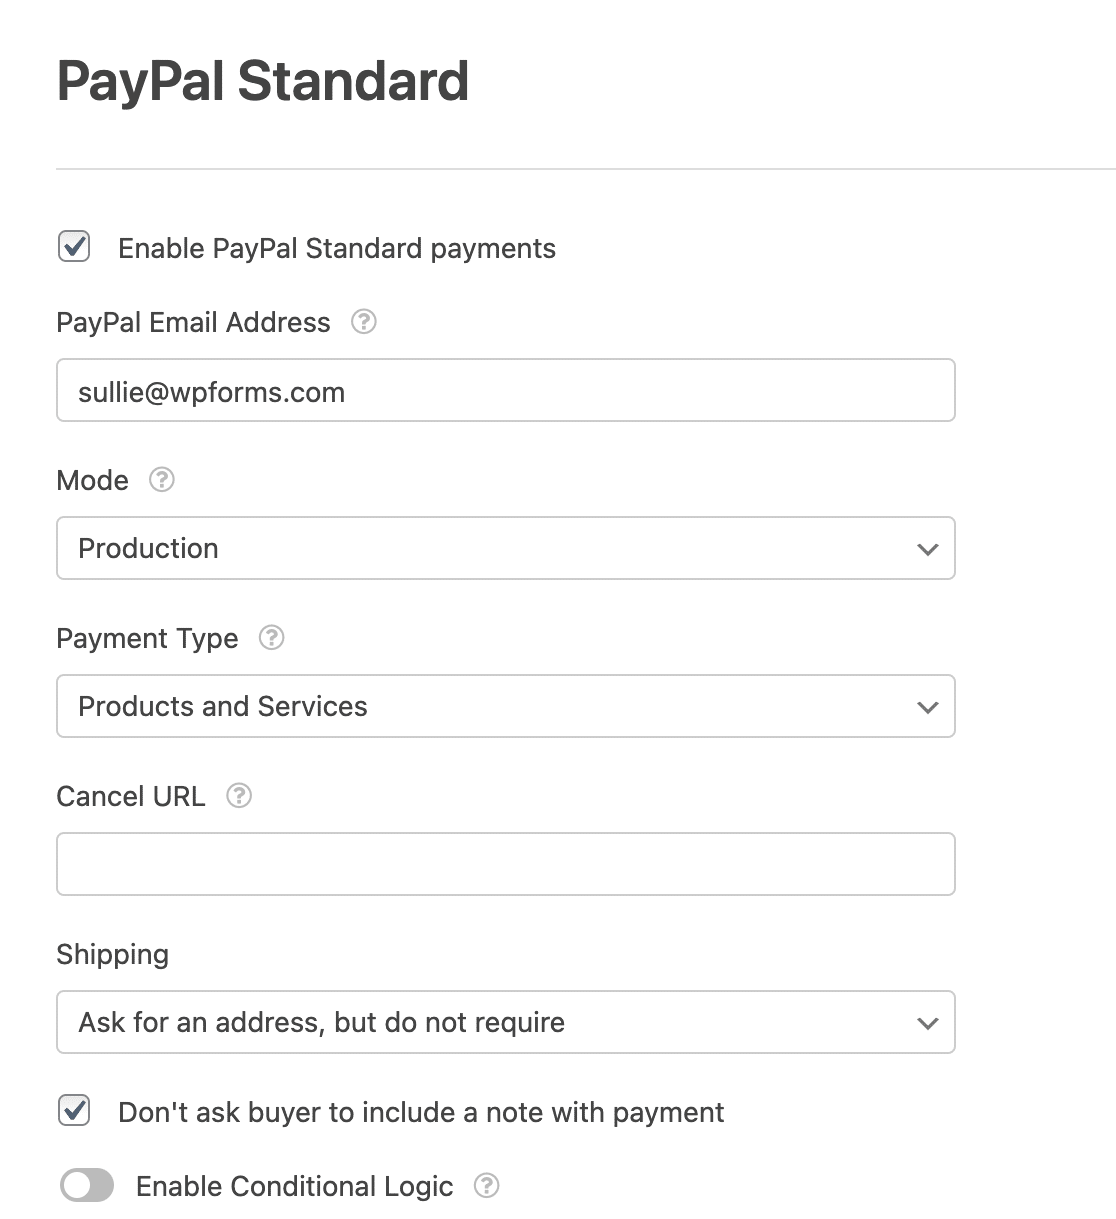 Configuring the settings for PayPal Standard payments